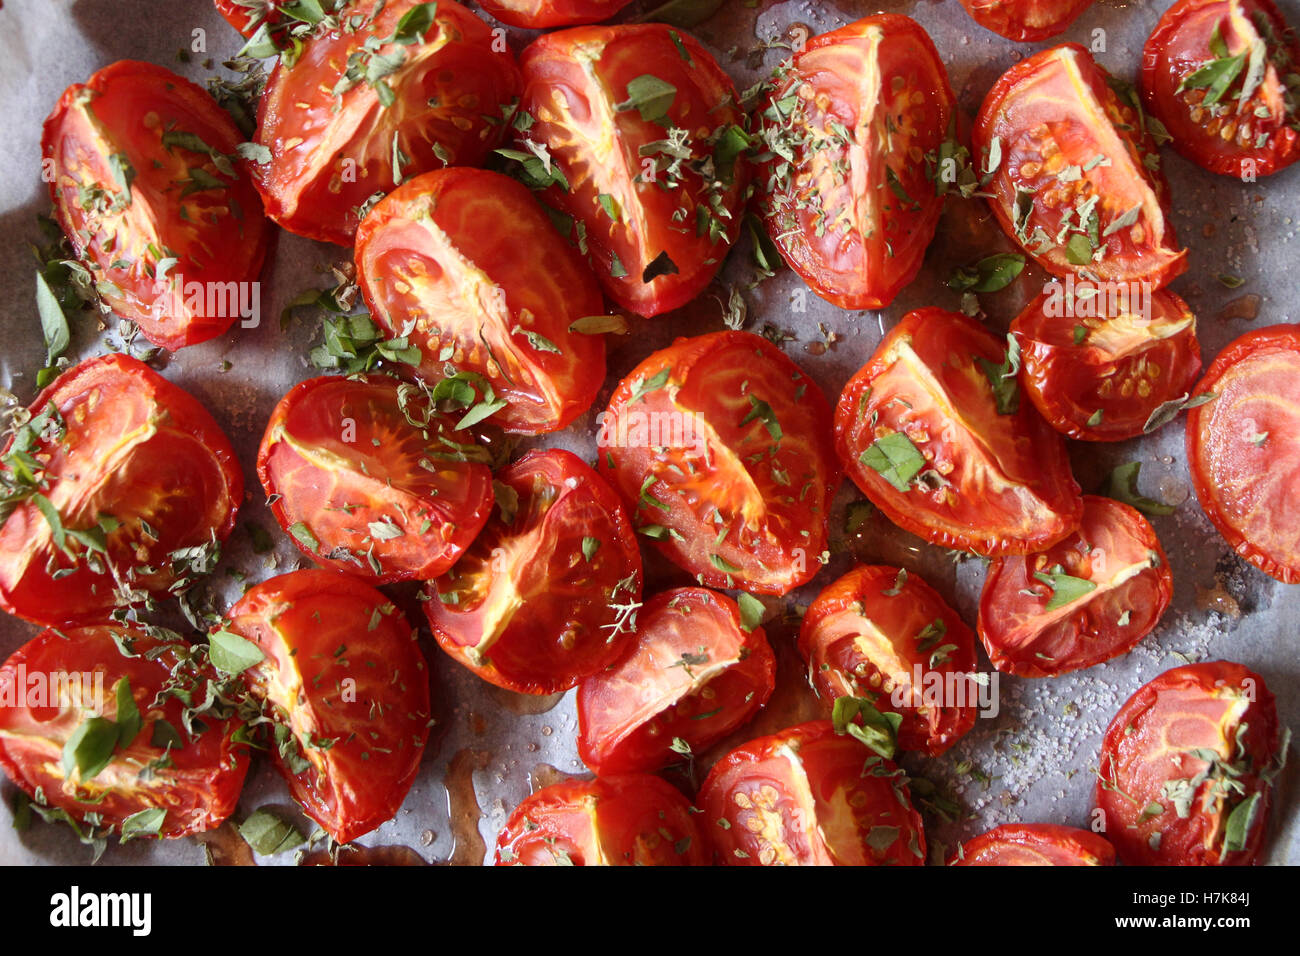 Home-made oven-roasted tomatoes, with fresh herbs and red wine vinegar on hand. Stock Photo